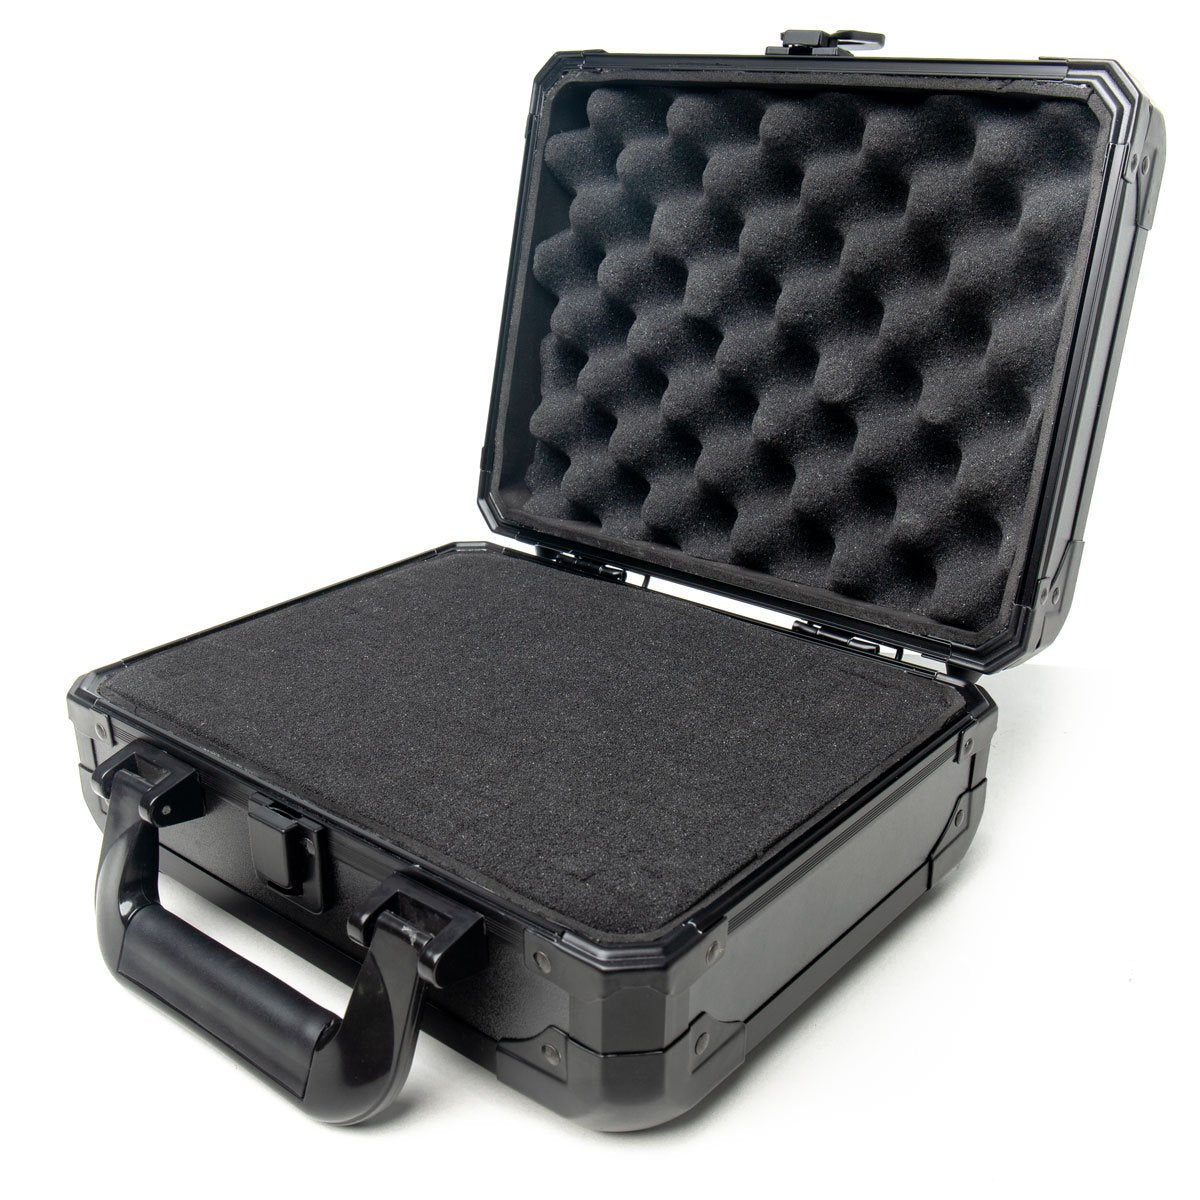 Critical Travel Case for Tattoo Equipment